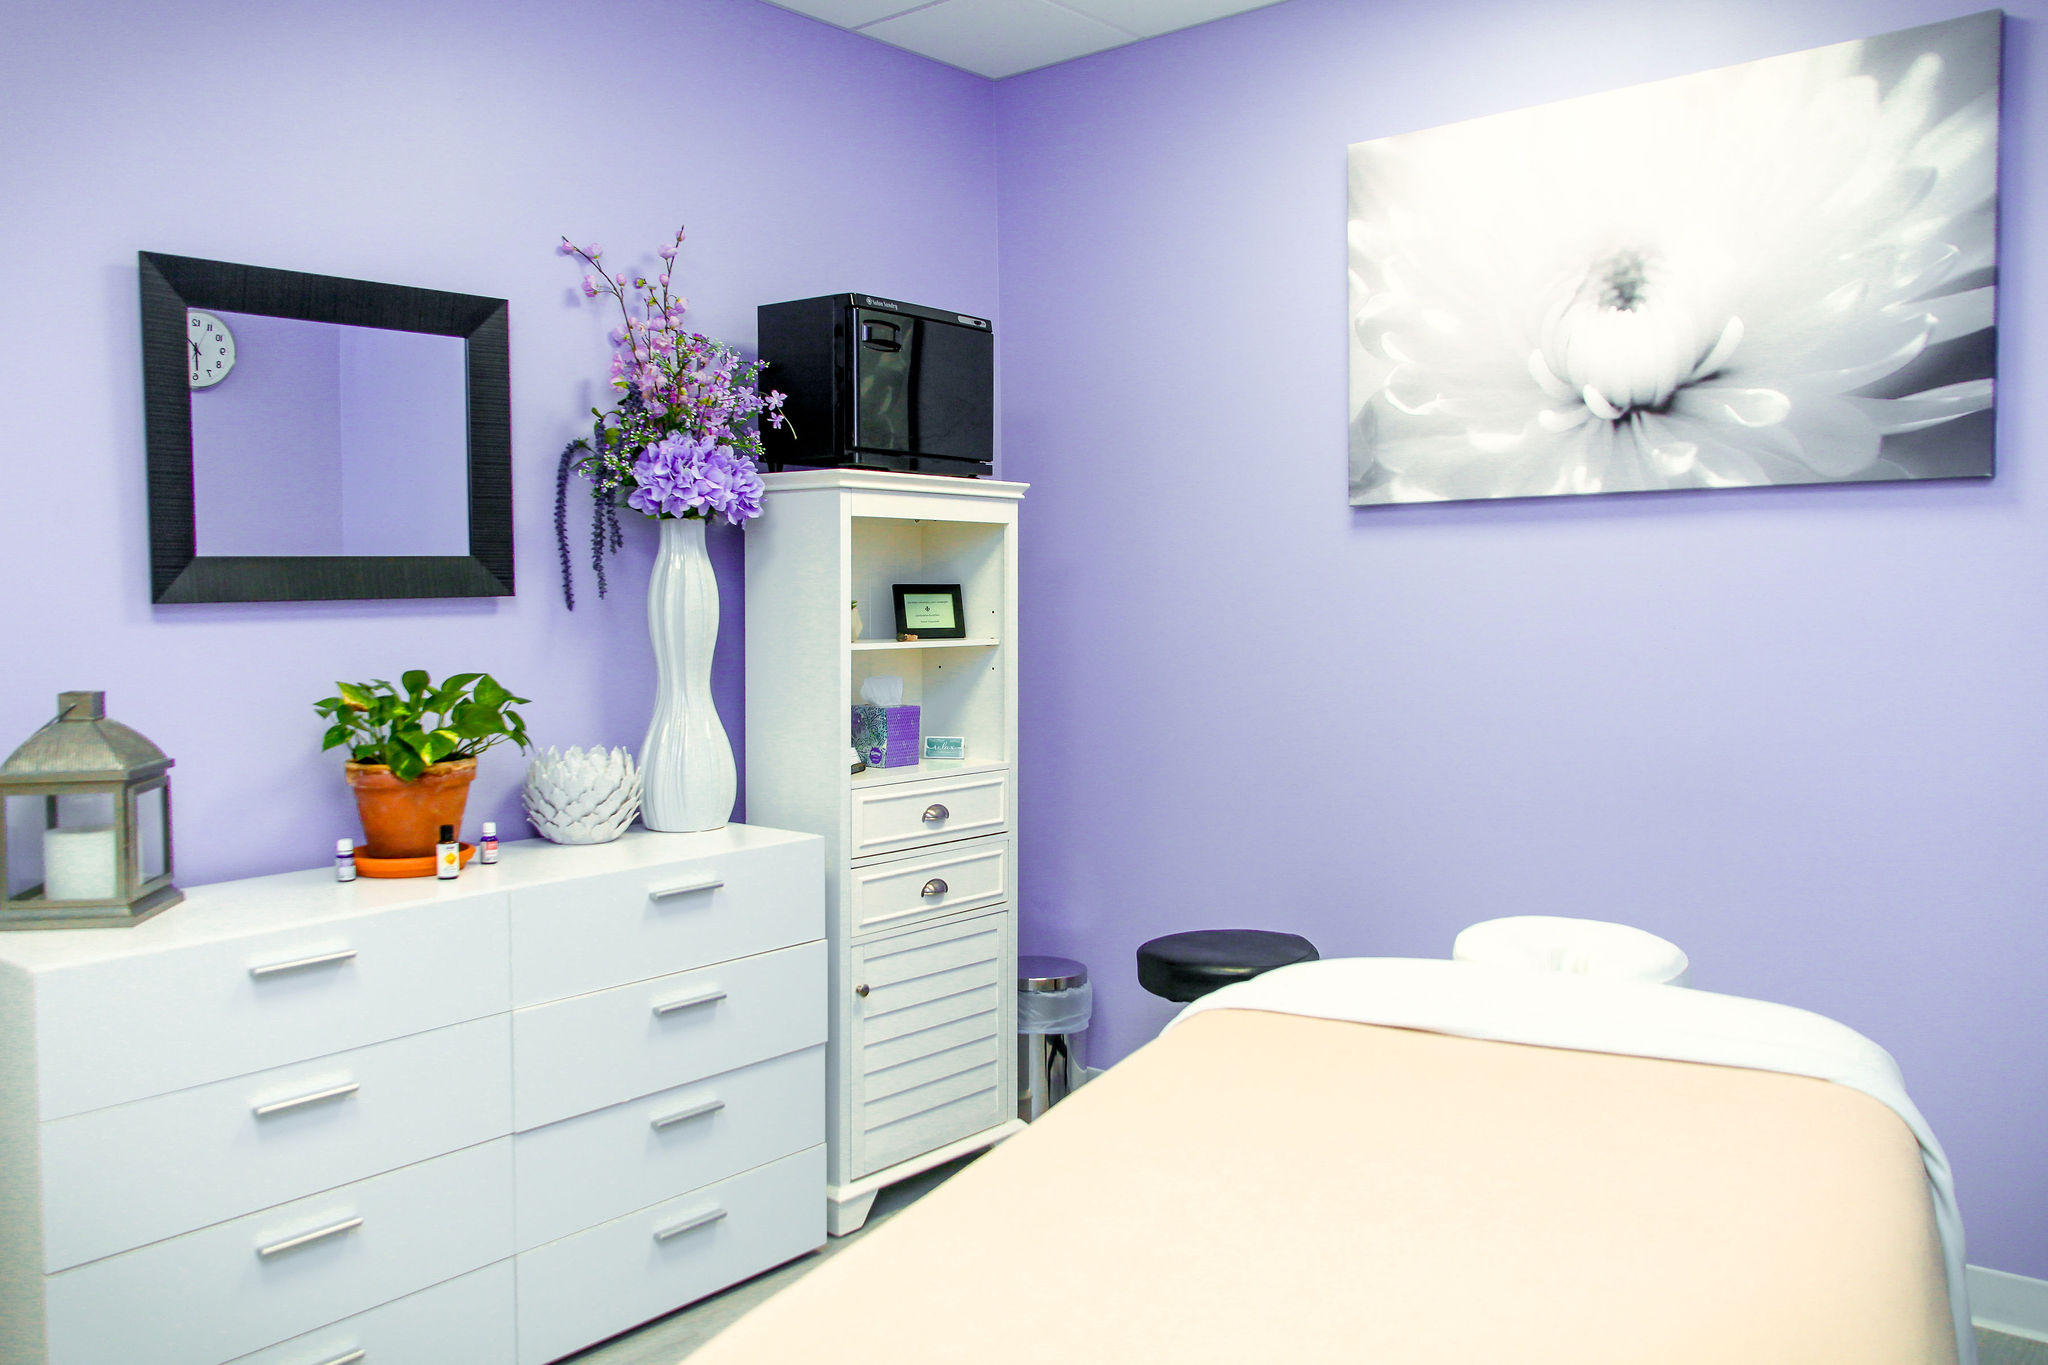 Massage Therapy Room ABChiropractic Family & Wellness St. Charles (636)916-0660